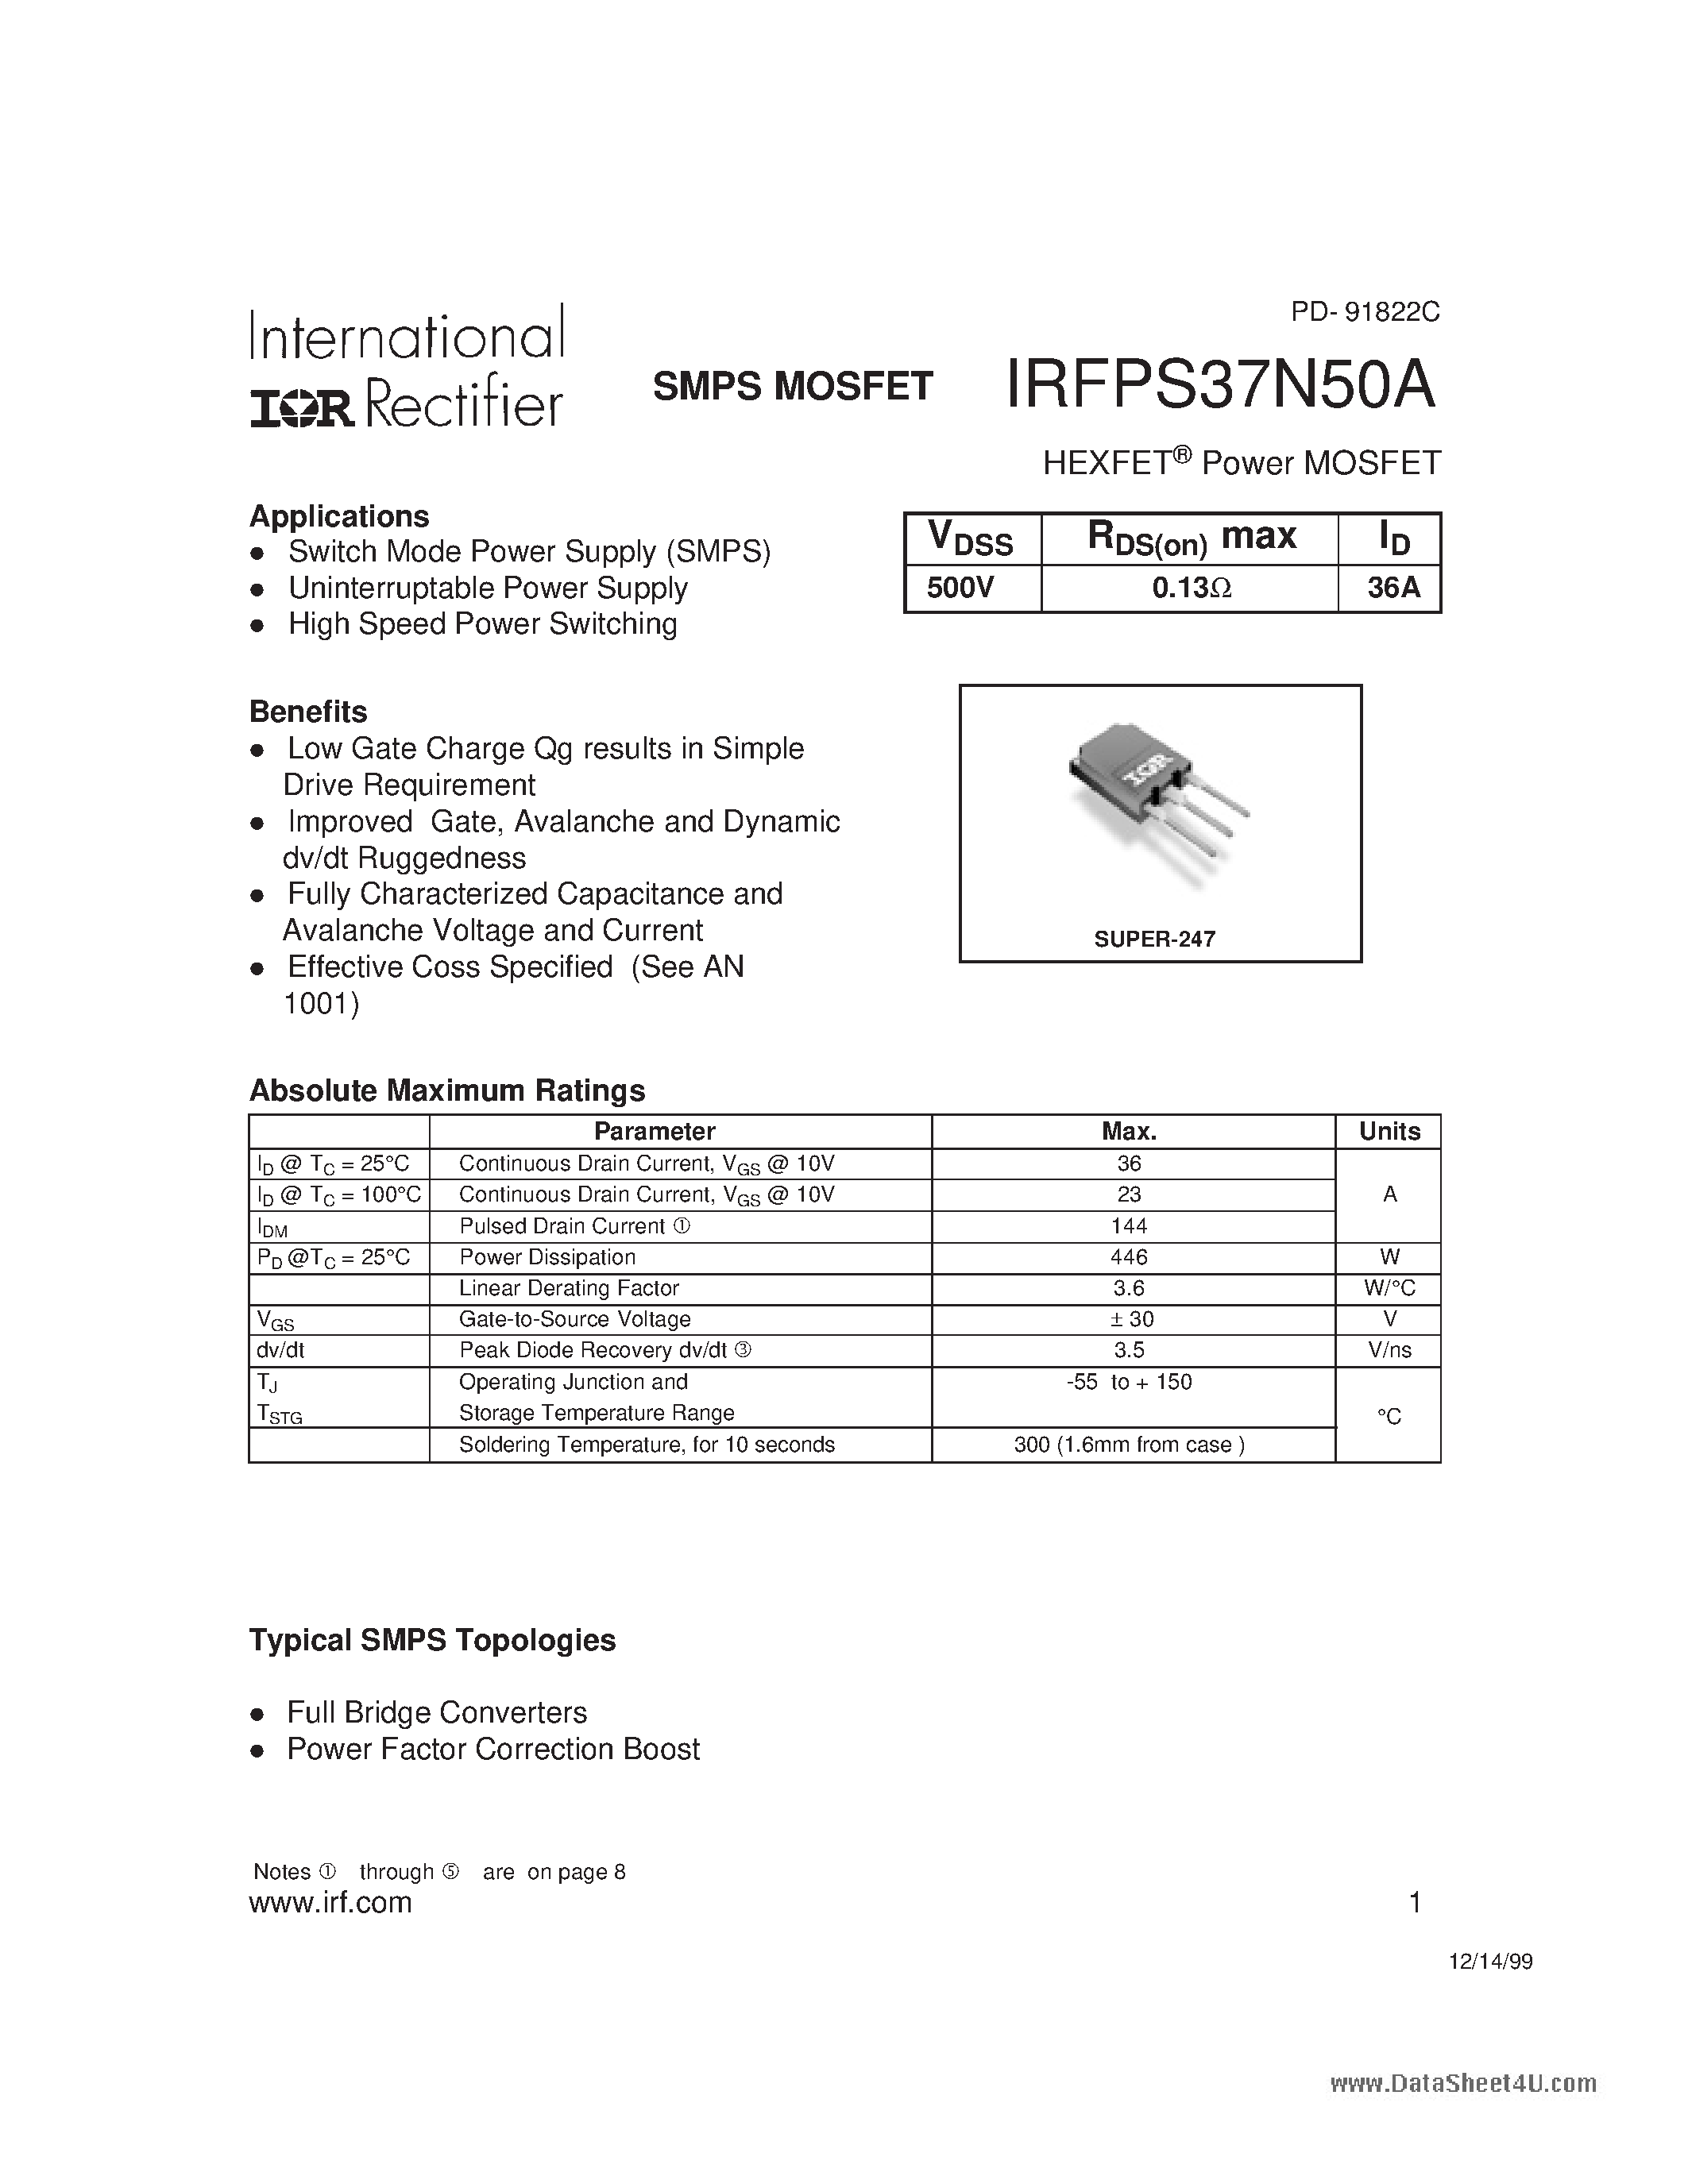 Datasheet IRFPS37N50A - HEXFET Power MOSFET page 1